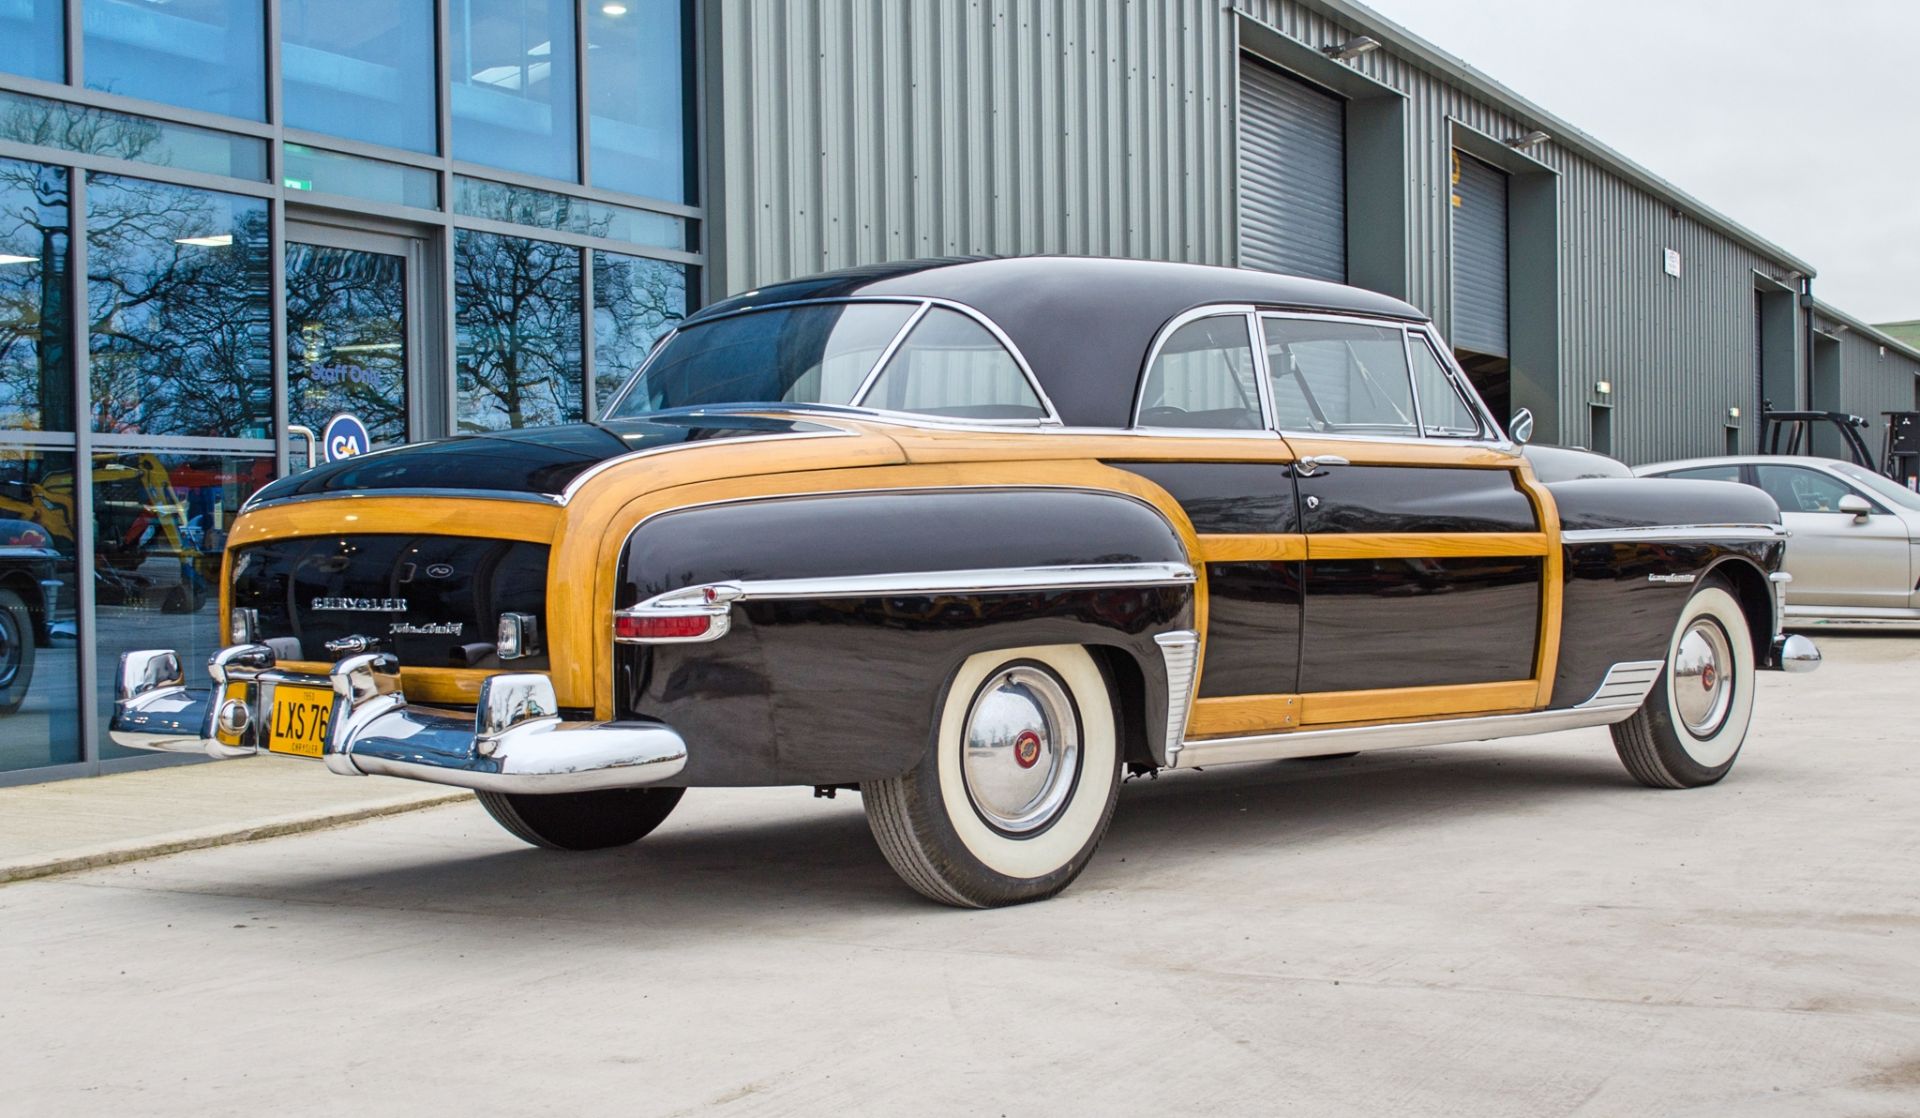 1950 Chrysler Newport Town and Country 5300cc 2 door Coupe - Image 5 of 62